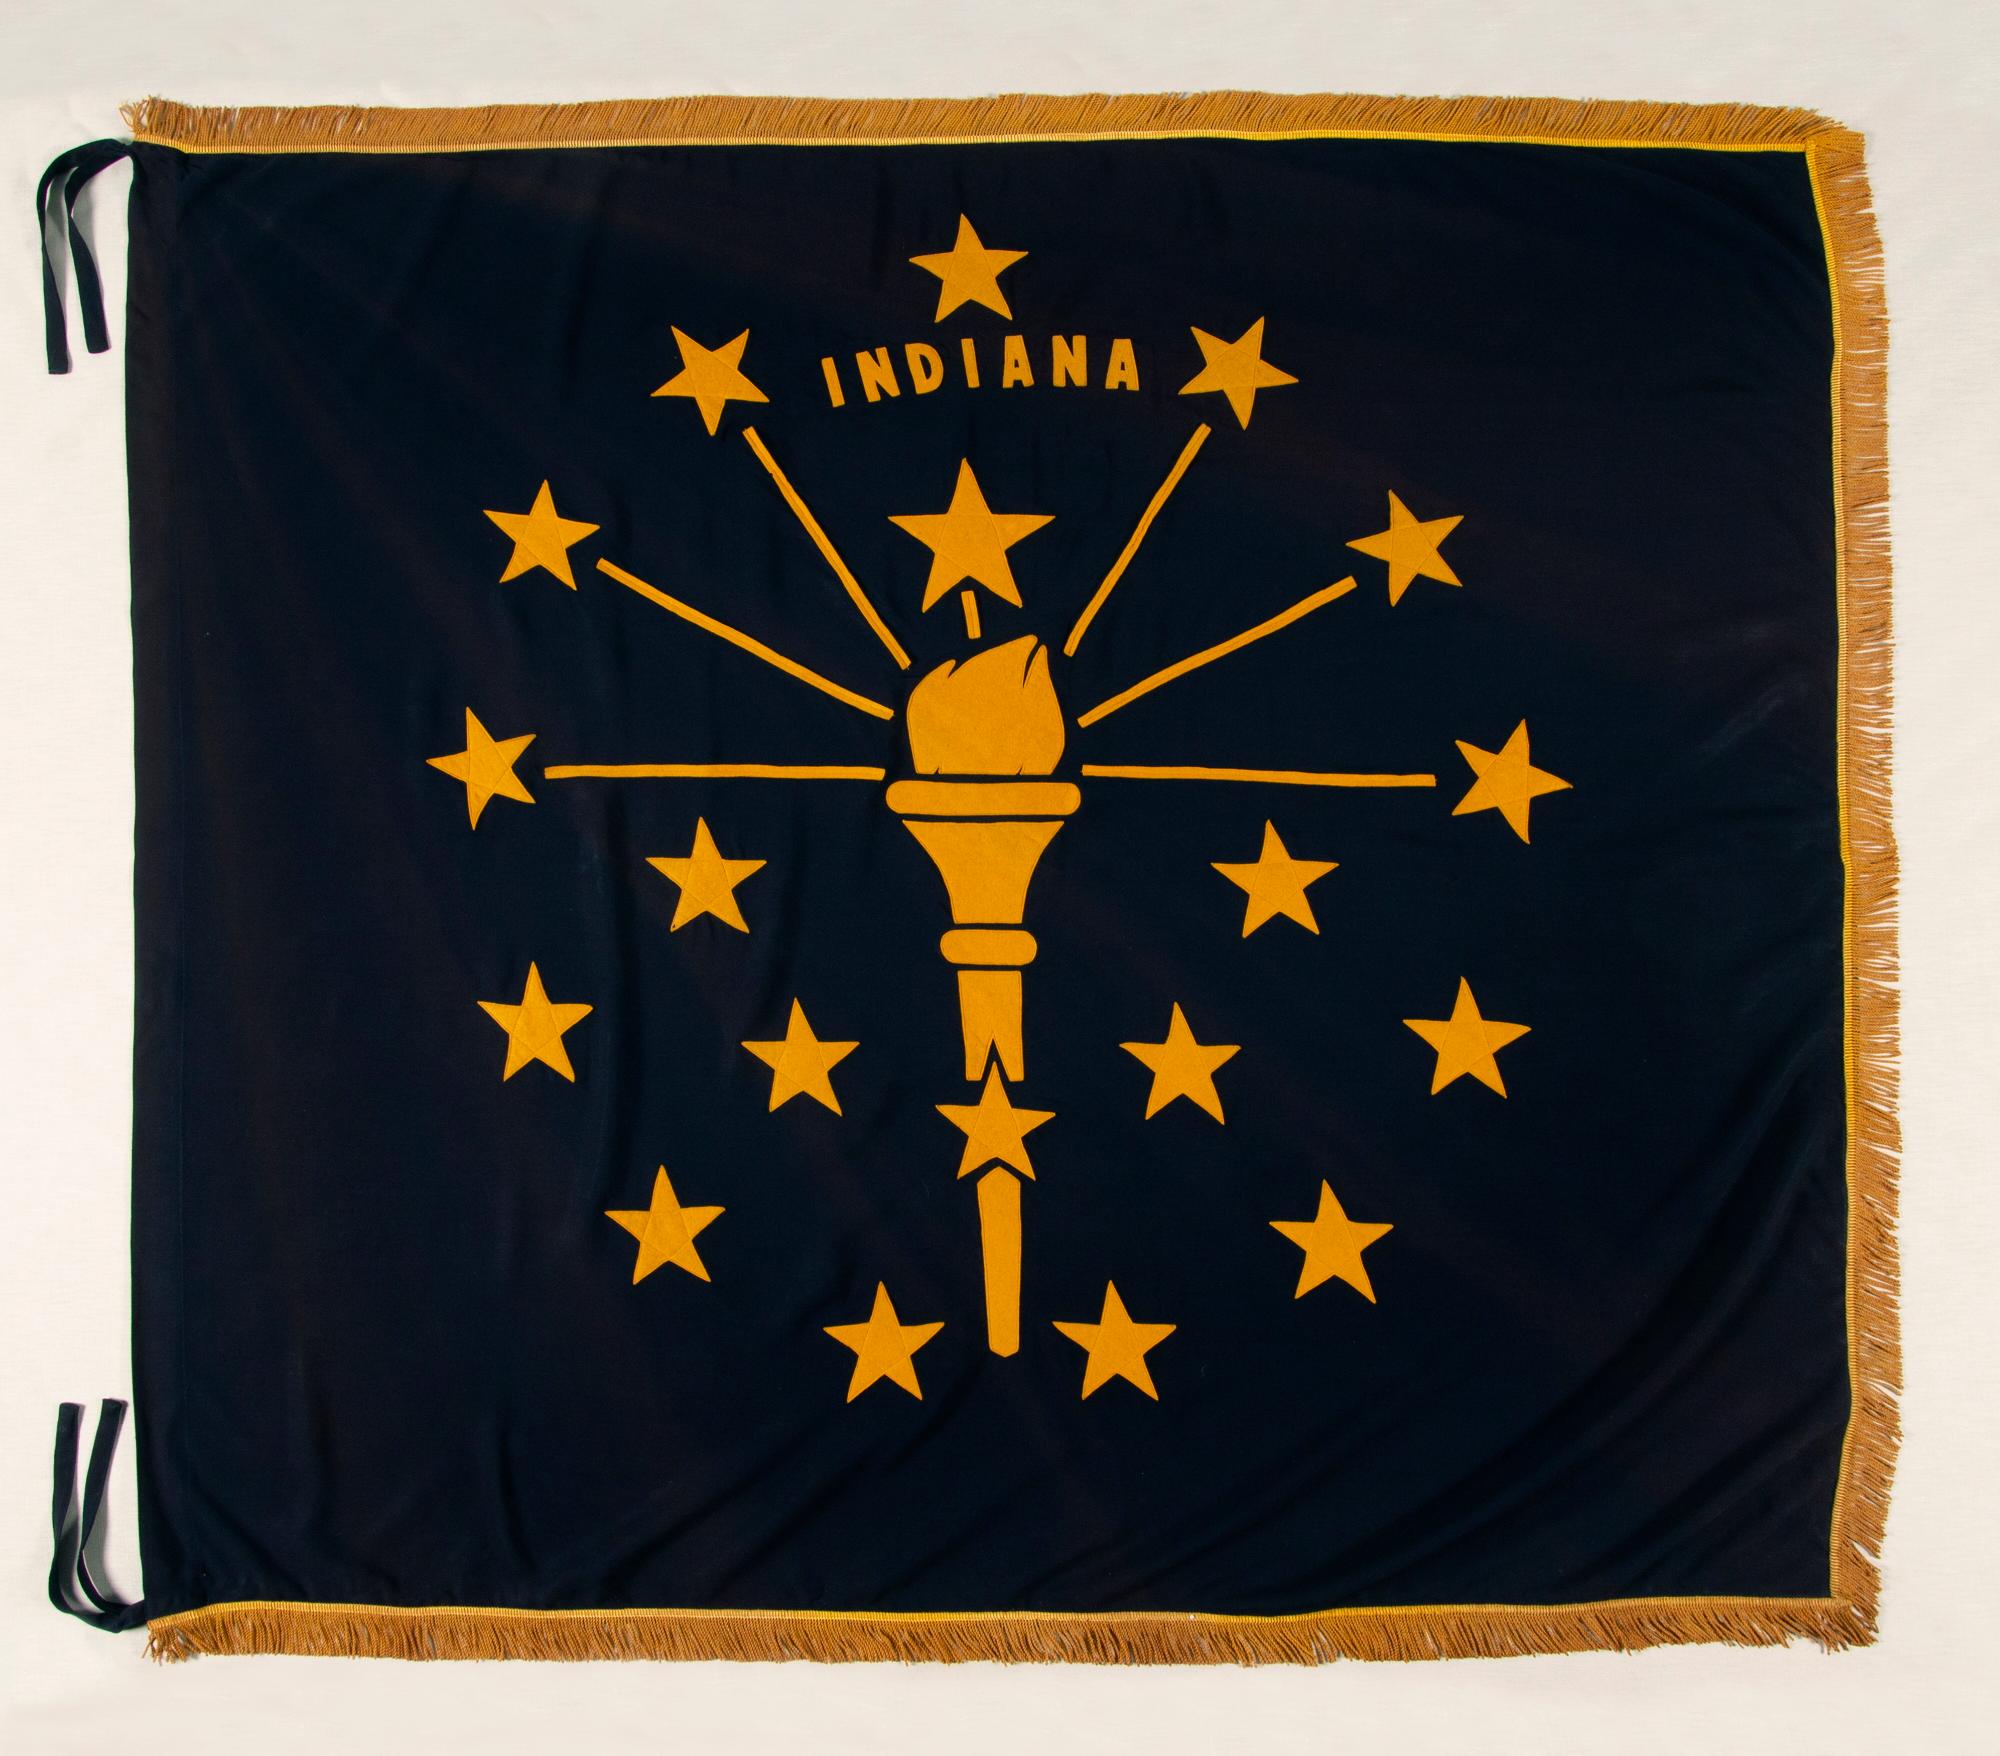 Indiana State Flag With Square-like Proportions, An Offset Device, And Gold Fringe, Circa 1930-1955:

Despite the fact that most of the United States joined the Union during the 18th and 19th centuries, many didn’t have a state flag until the